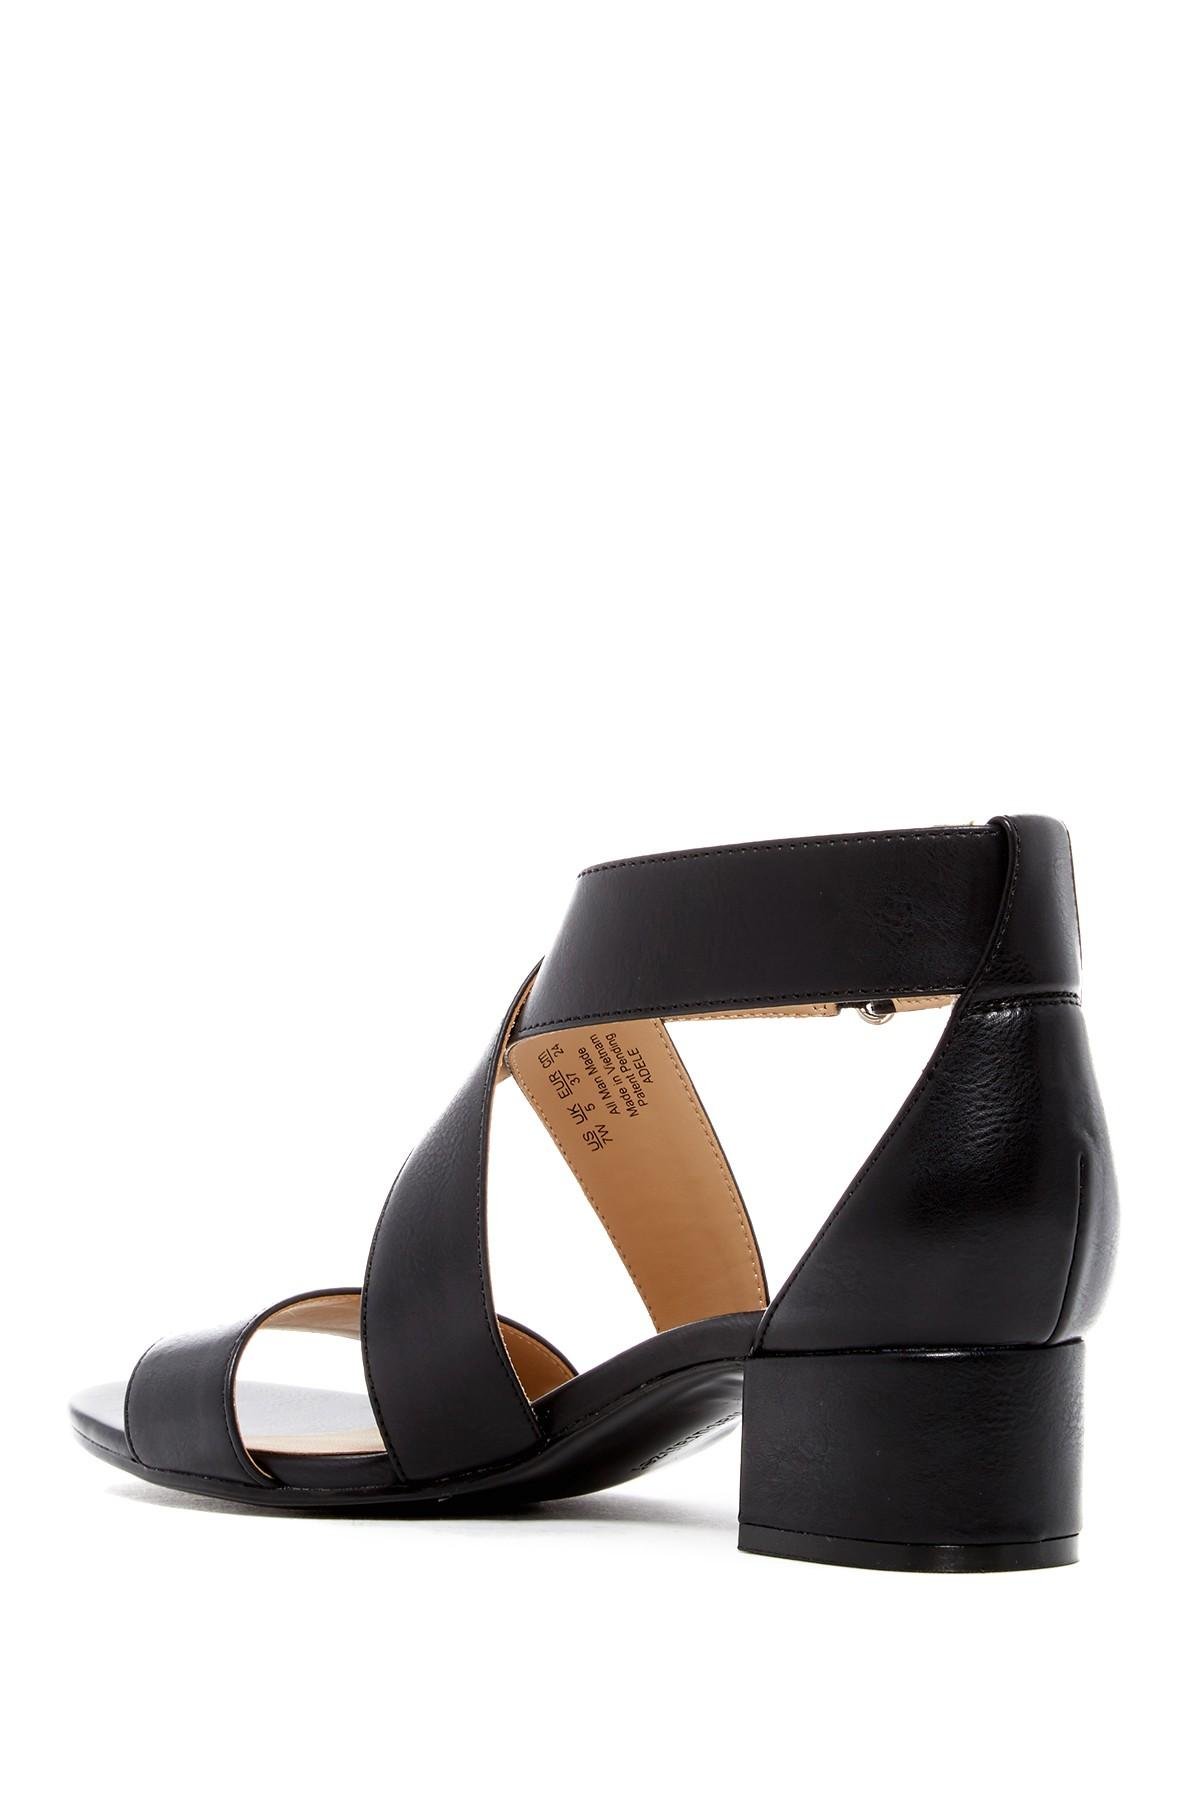 Naturalizer Adele Heeled Sandal - Wide Width Available in Black - Lyst